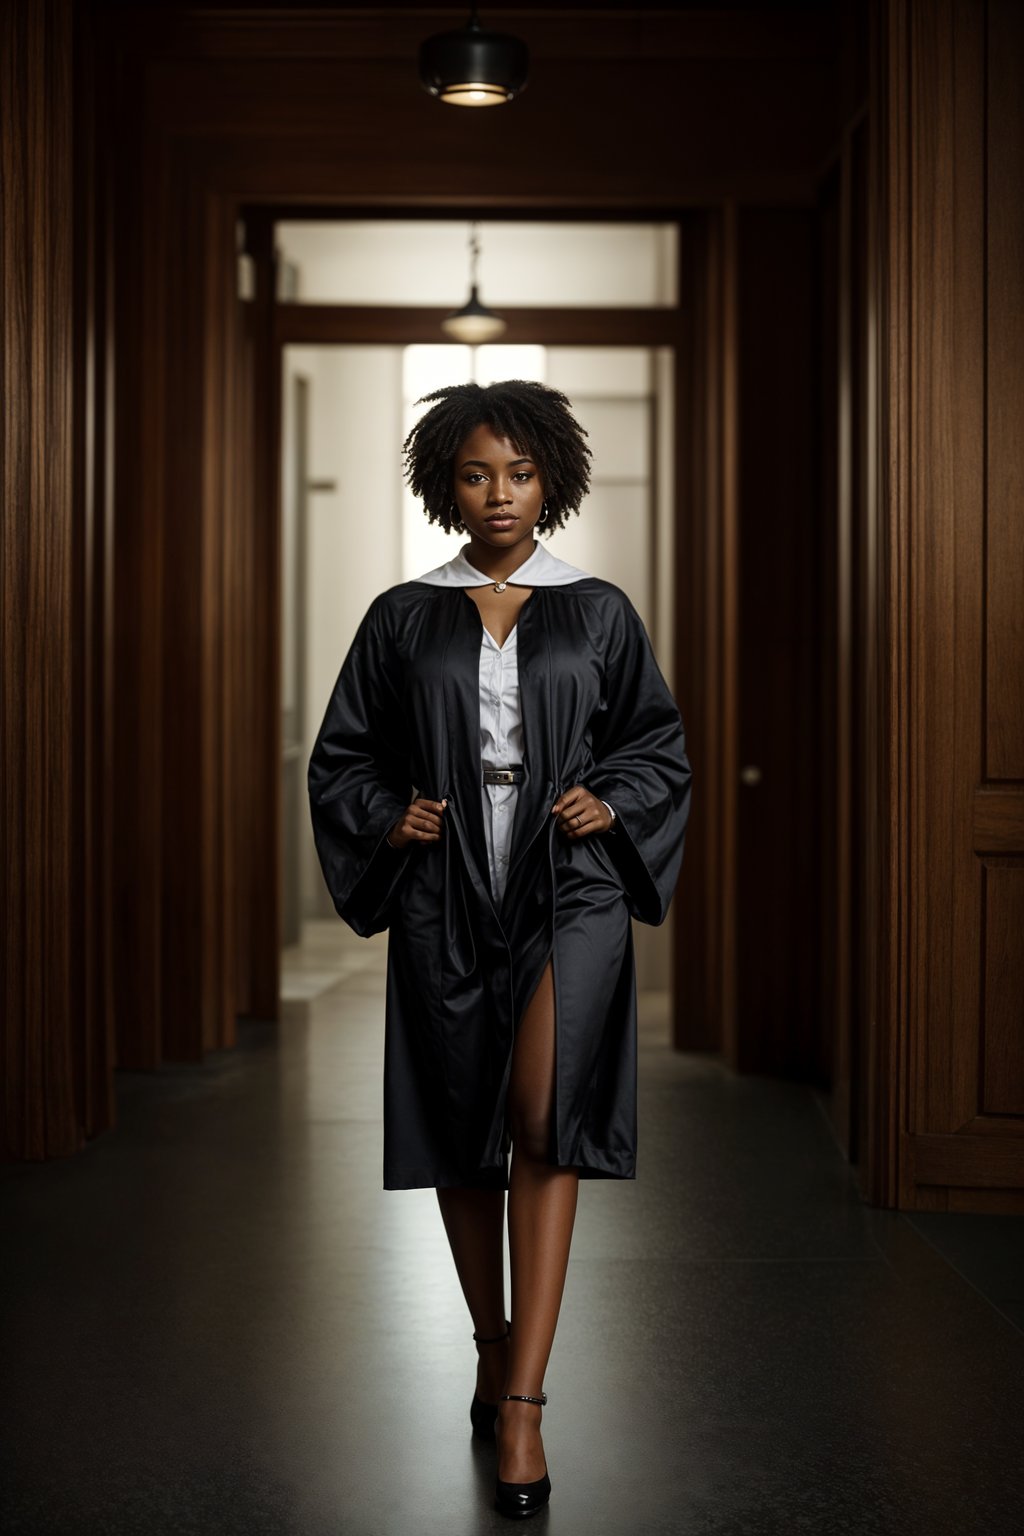 a graduate woman in their academic gown, holding a key or a keychain, representing the doors of opportunities opening up after graduation